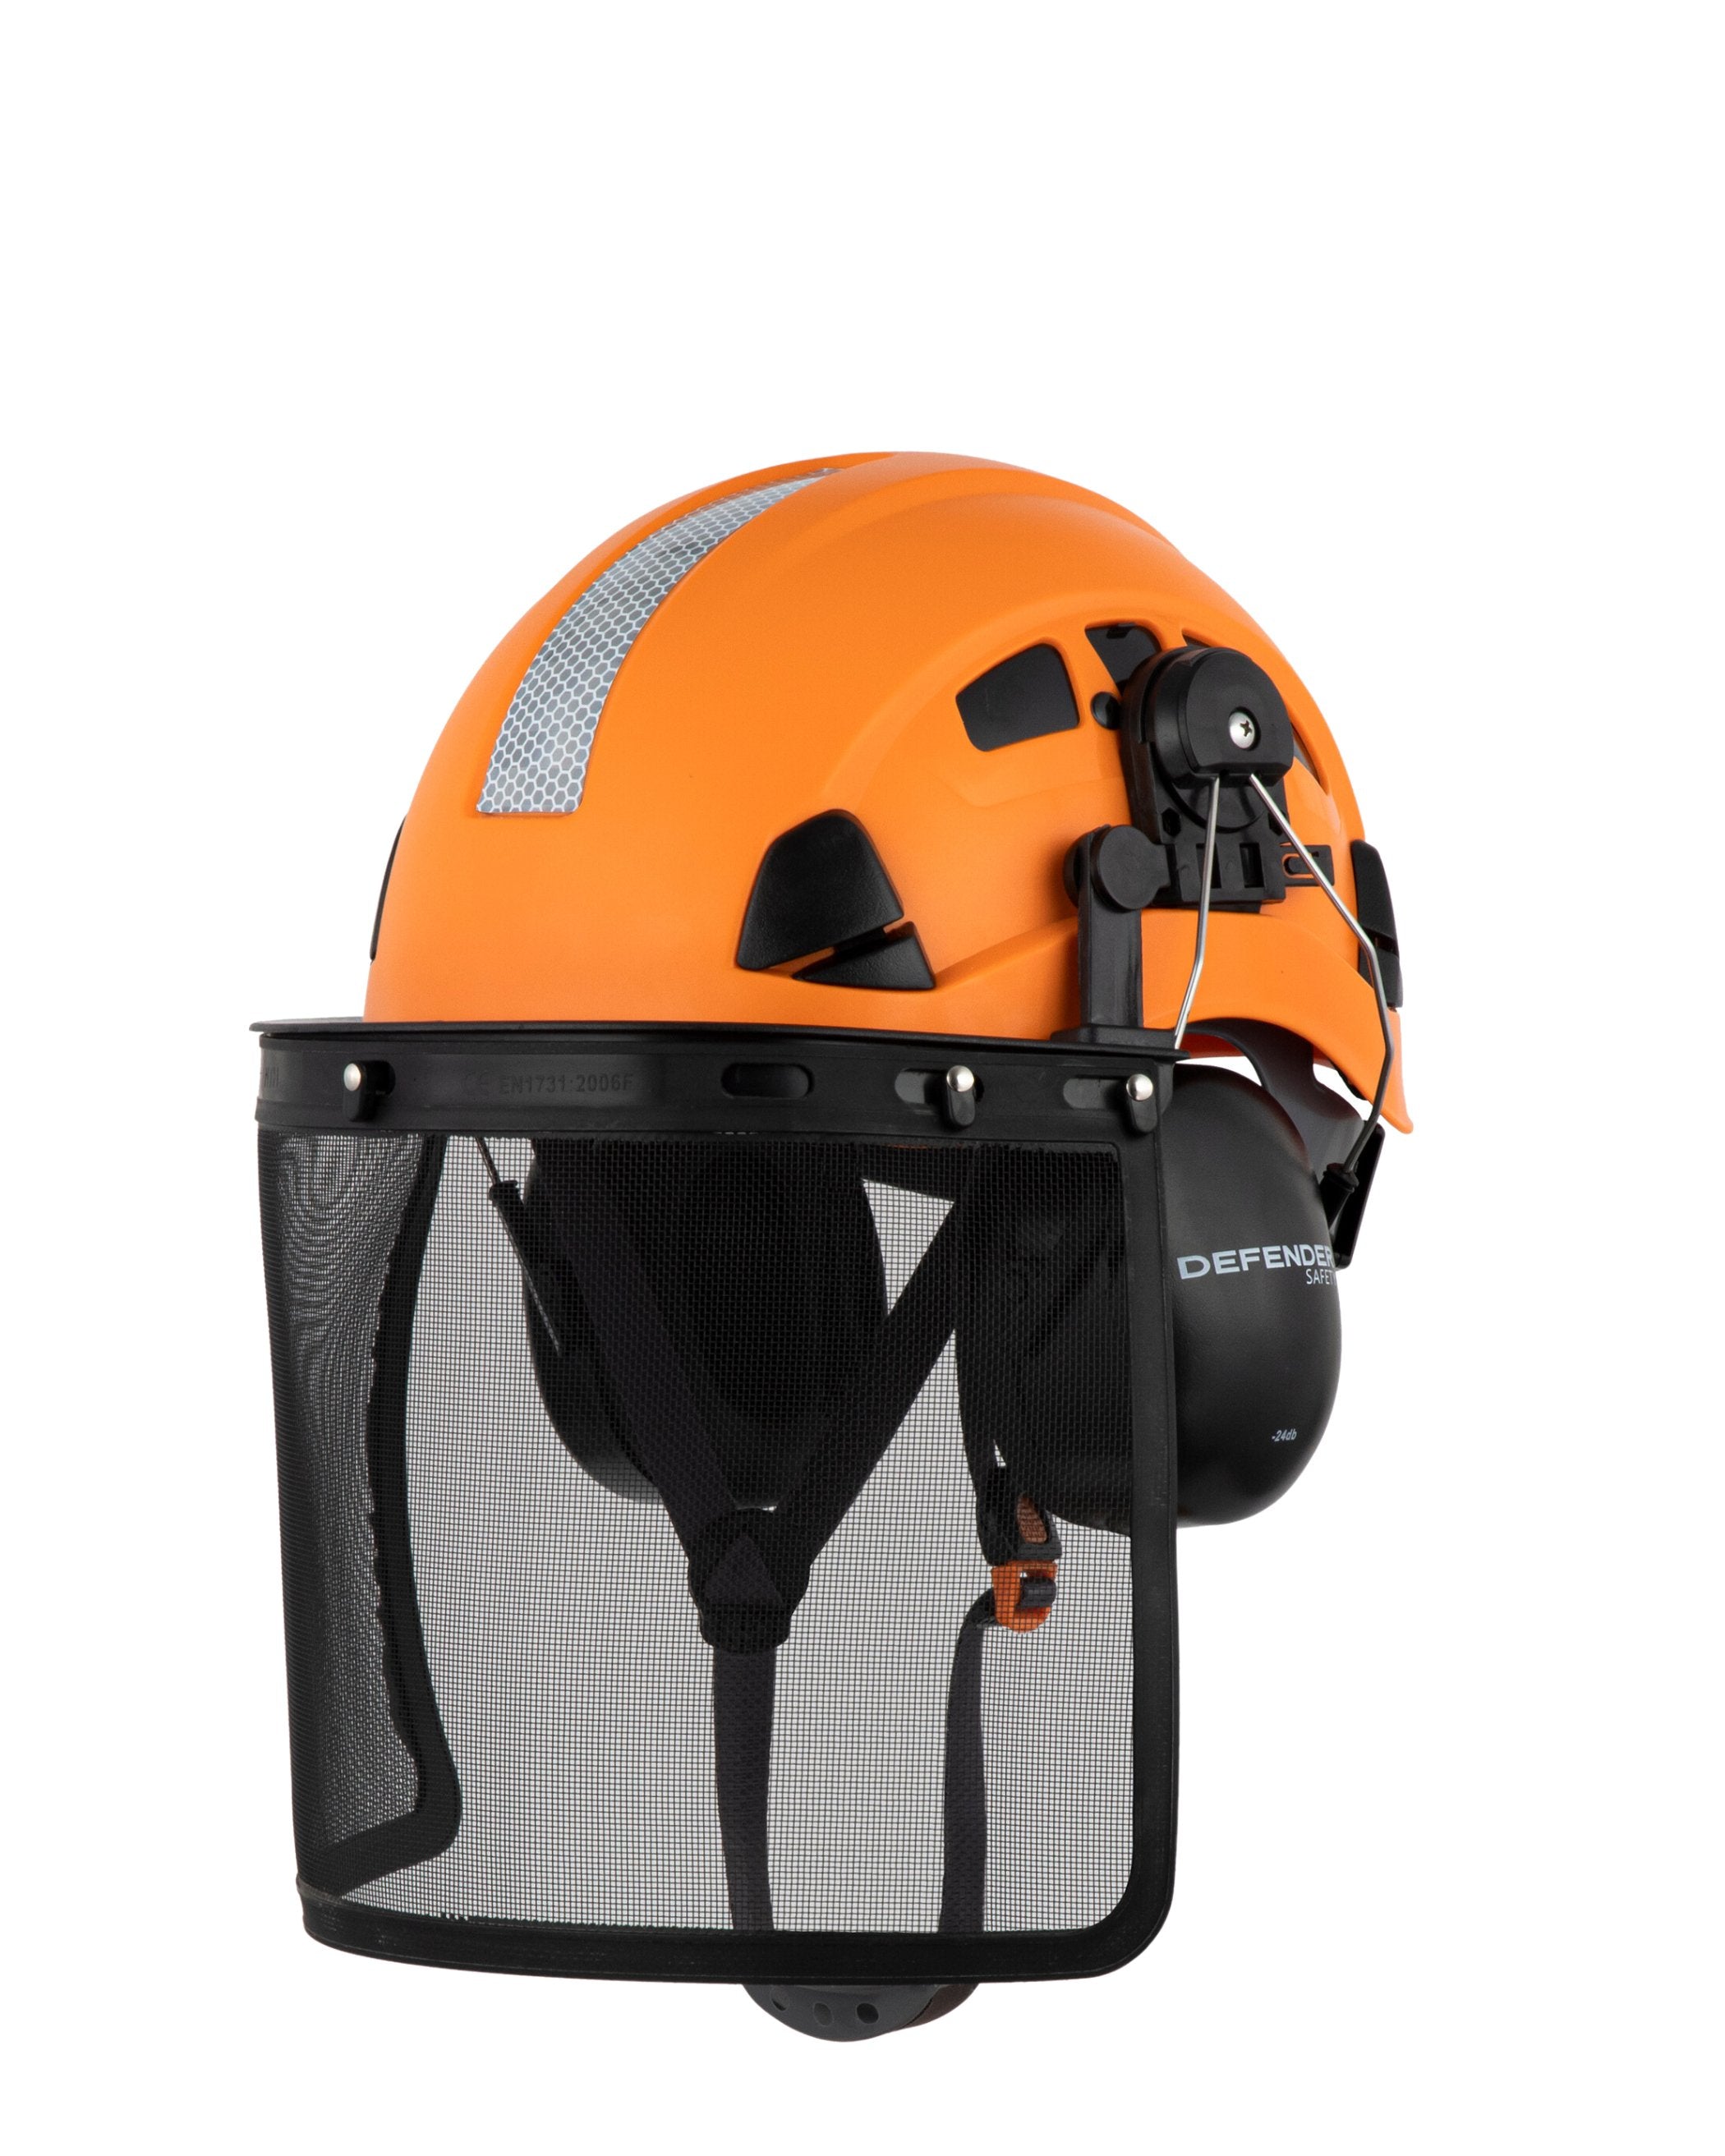 H1-CH Arborist Helmet for Forestry/Tree Safety + Hearing Protection